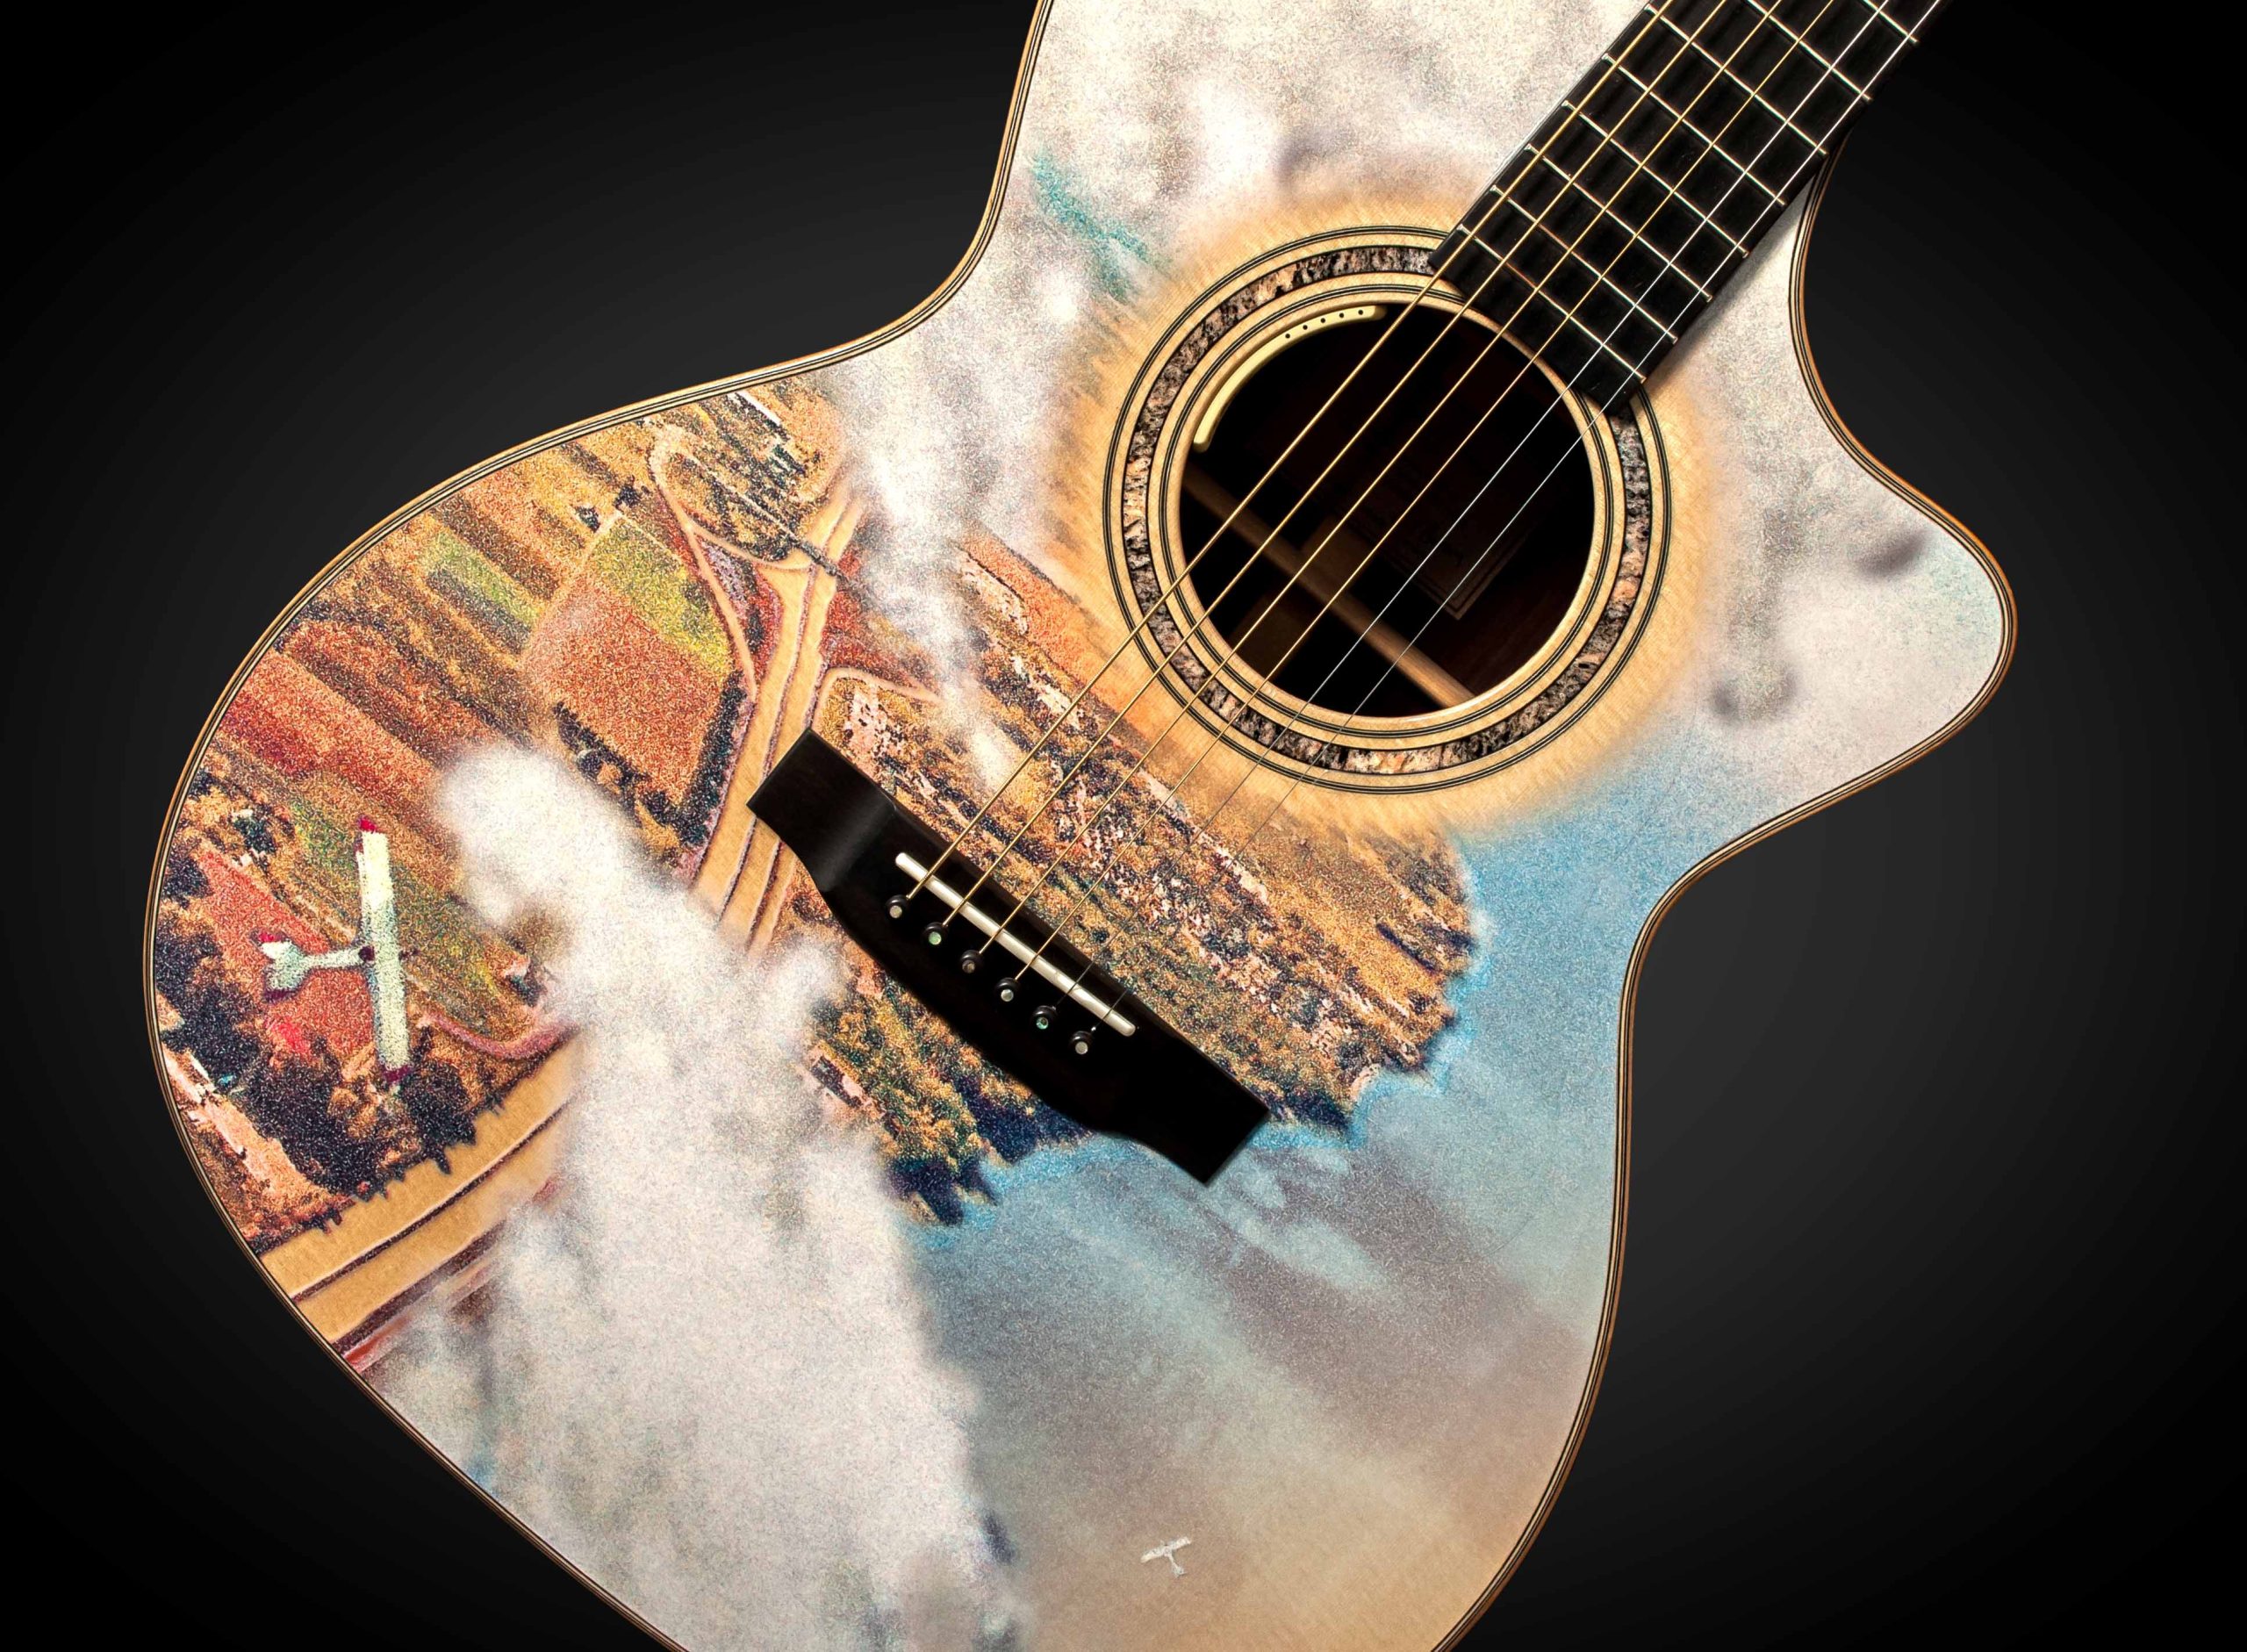 Photograph of the front of a guitar body. The body has an aerial view of a landscape looking down through clouds. There are two small white aeroplanes flying over a patchwork of fields on the left, a highway and a town which borders a shoreline on the right. The body of water is shades of blue.